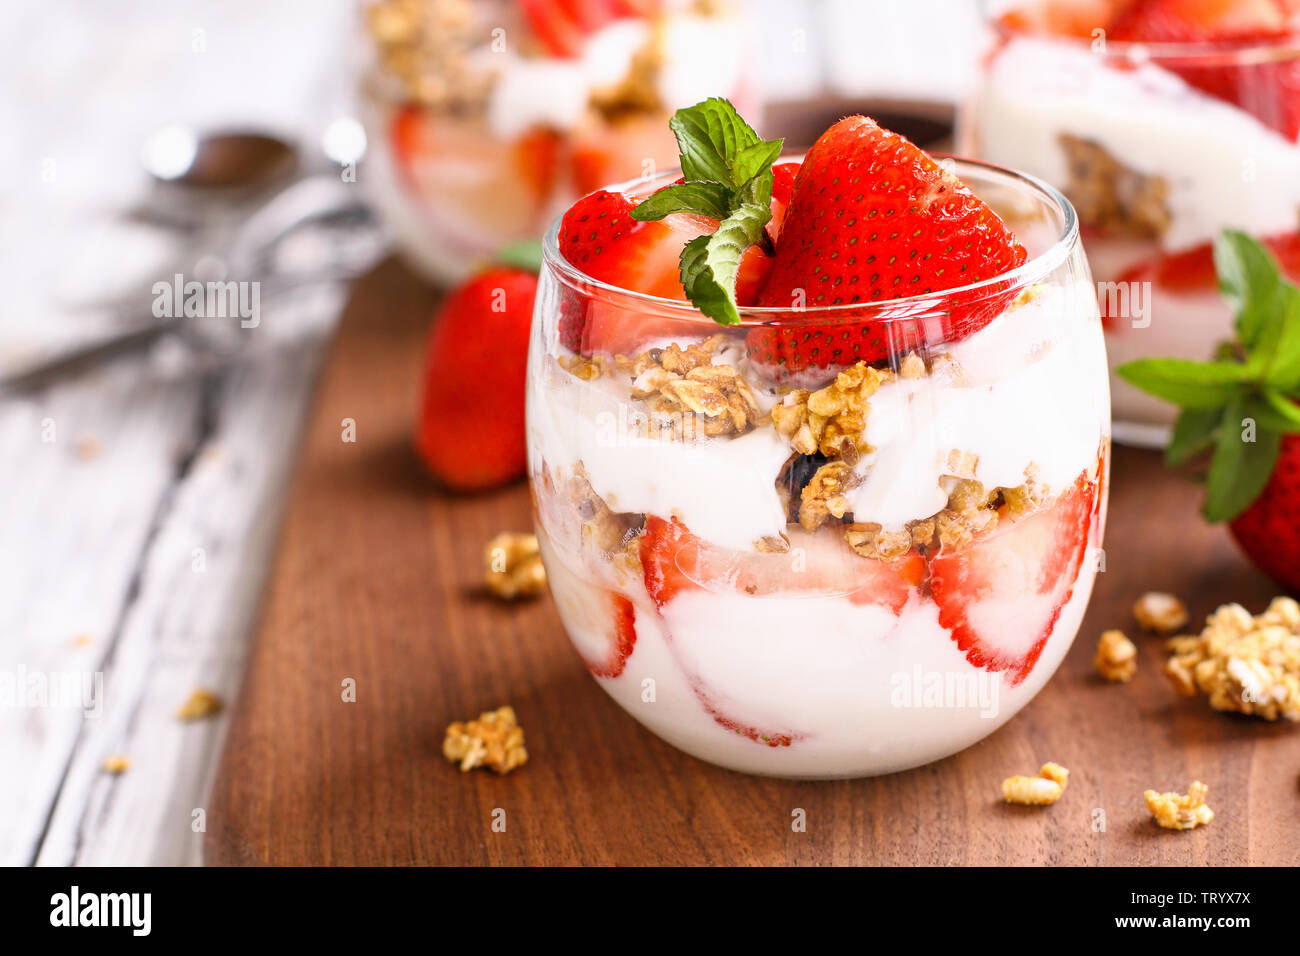 Healthy breakfast of strawberry parfaits made with fresh fruit, yogurt and granola over a rustic white table. Selective focus. Stock Photo